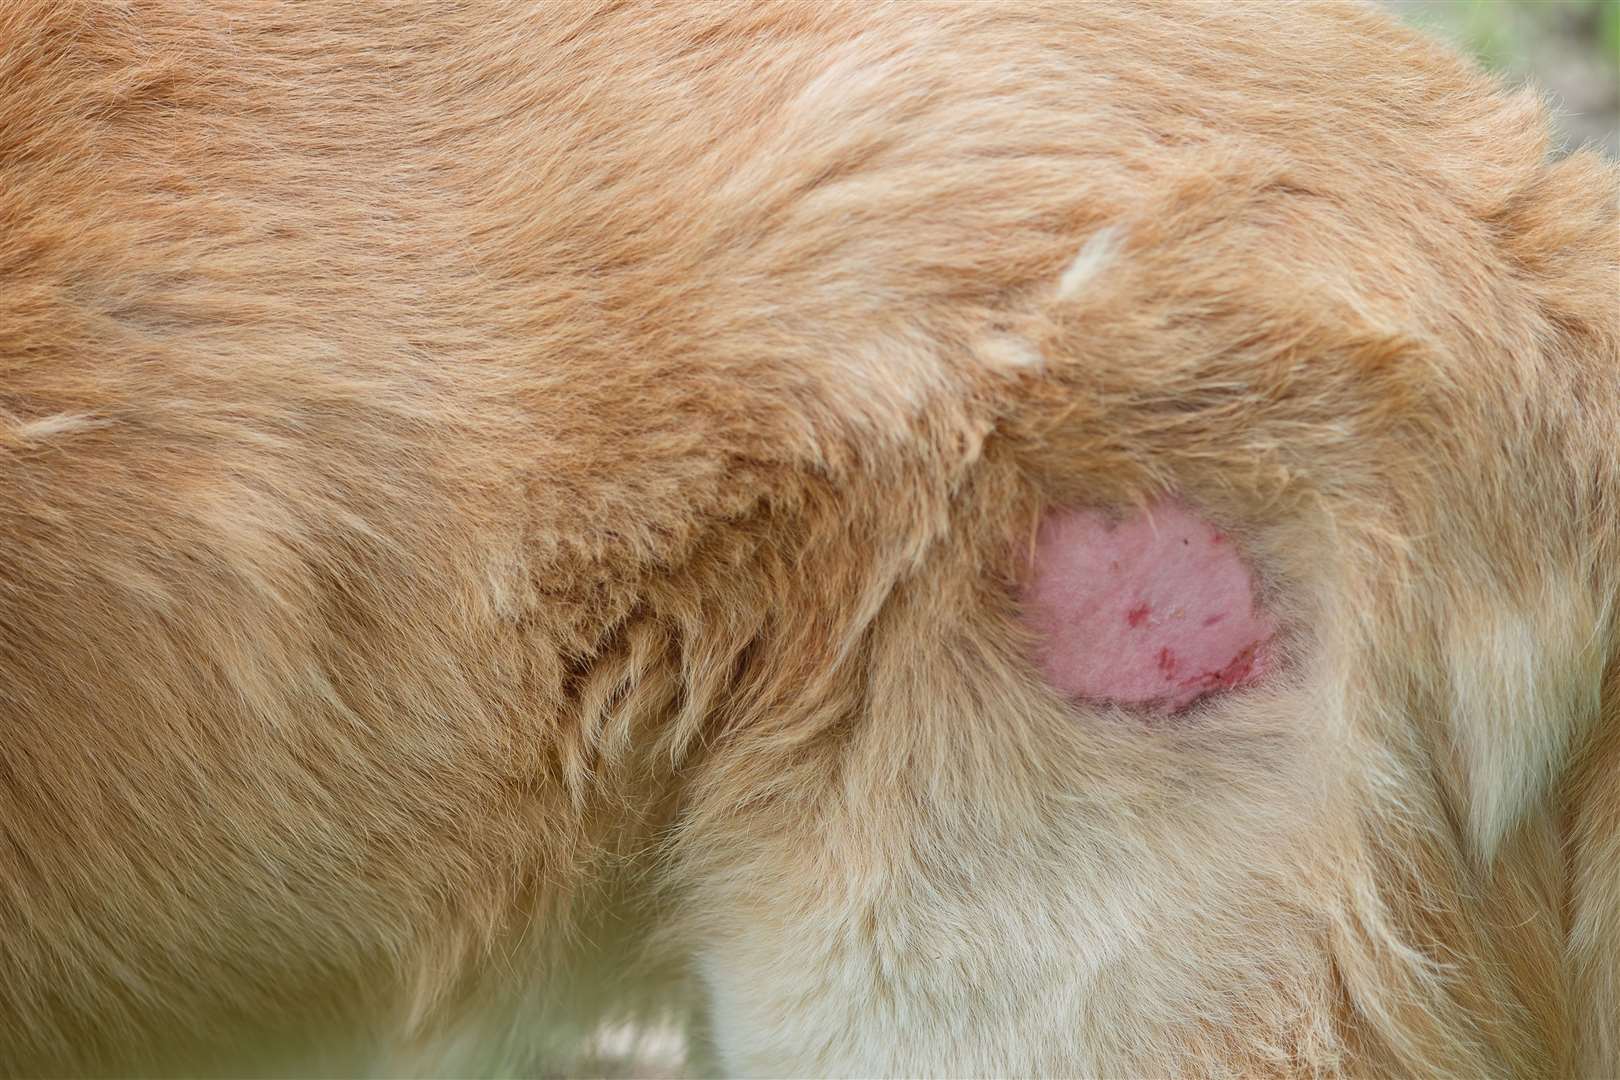 A wound on a dog due to a skin condition. Picture: istock/Nattaki Khunburan